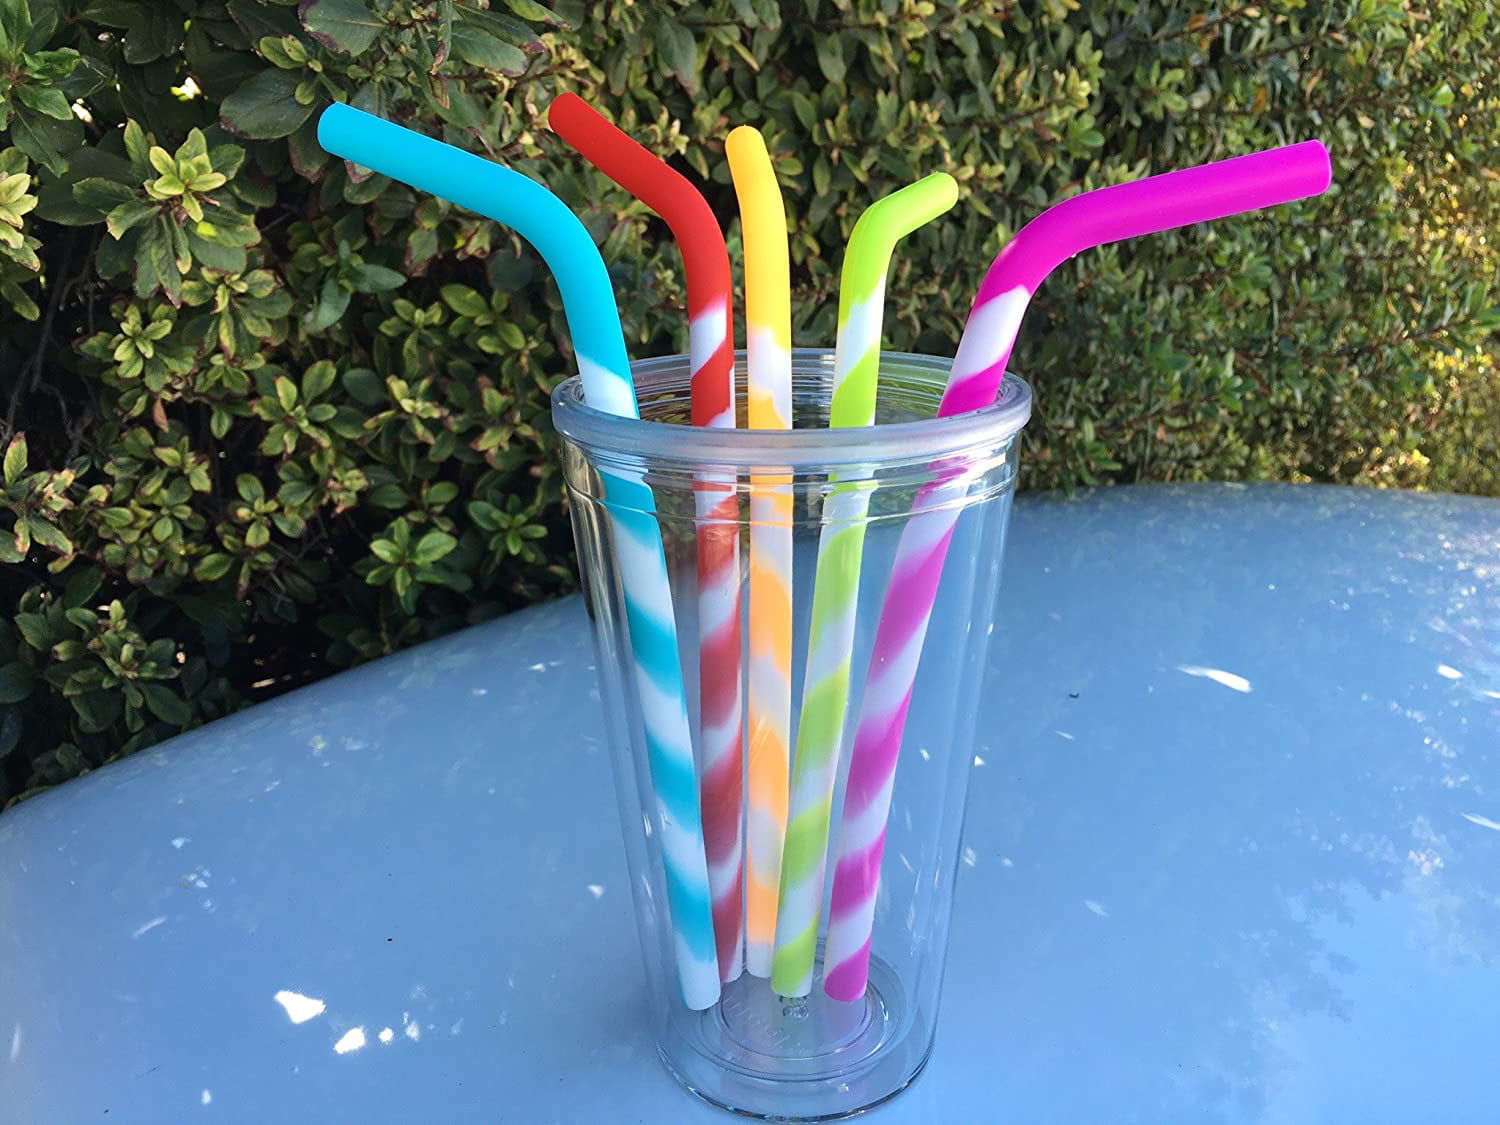 The Silicone Straw, 6 Food-Grade Silicone Straws, BPA Free, Thick & Re –  The Lily Rose Store